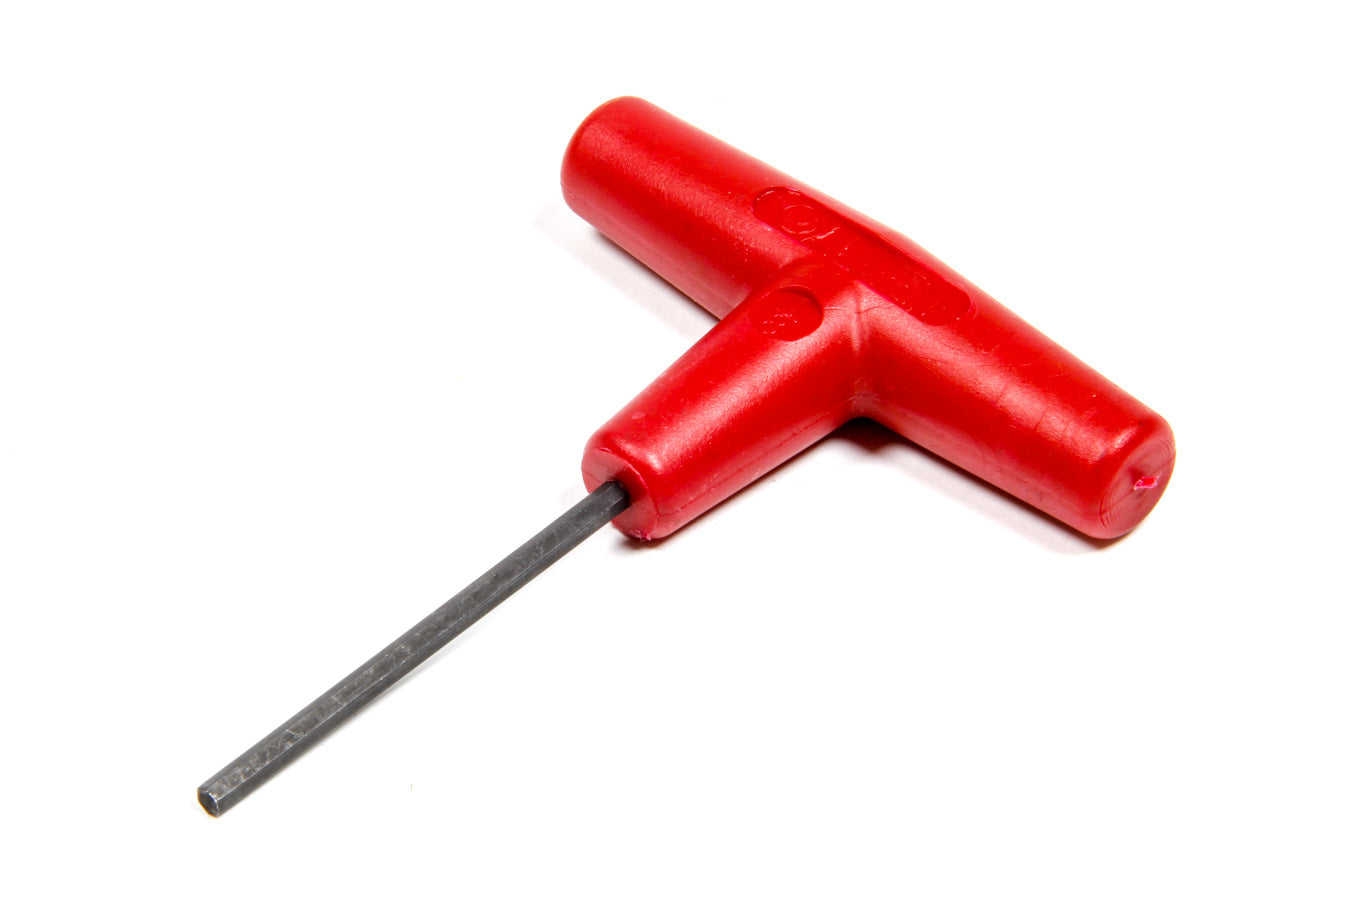 LSM Racing Products T-Handle Hex Key - 1/8 LSM1T-1/8